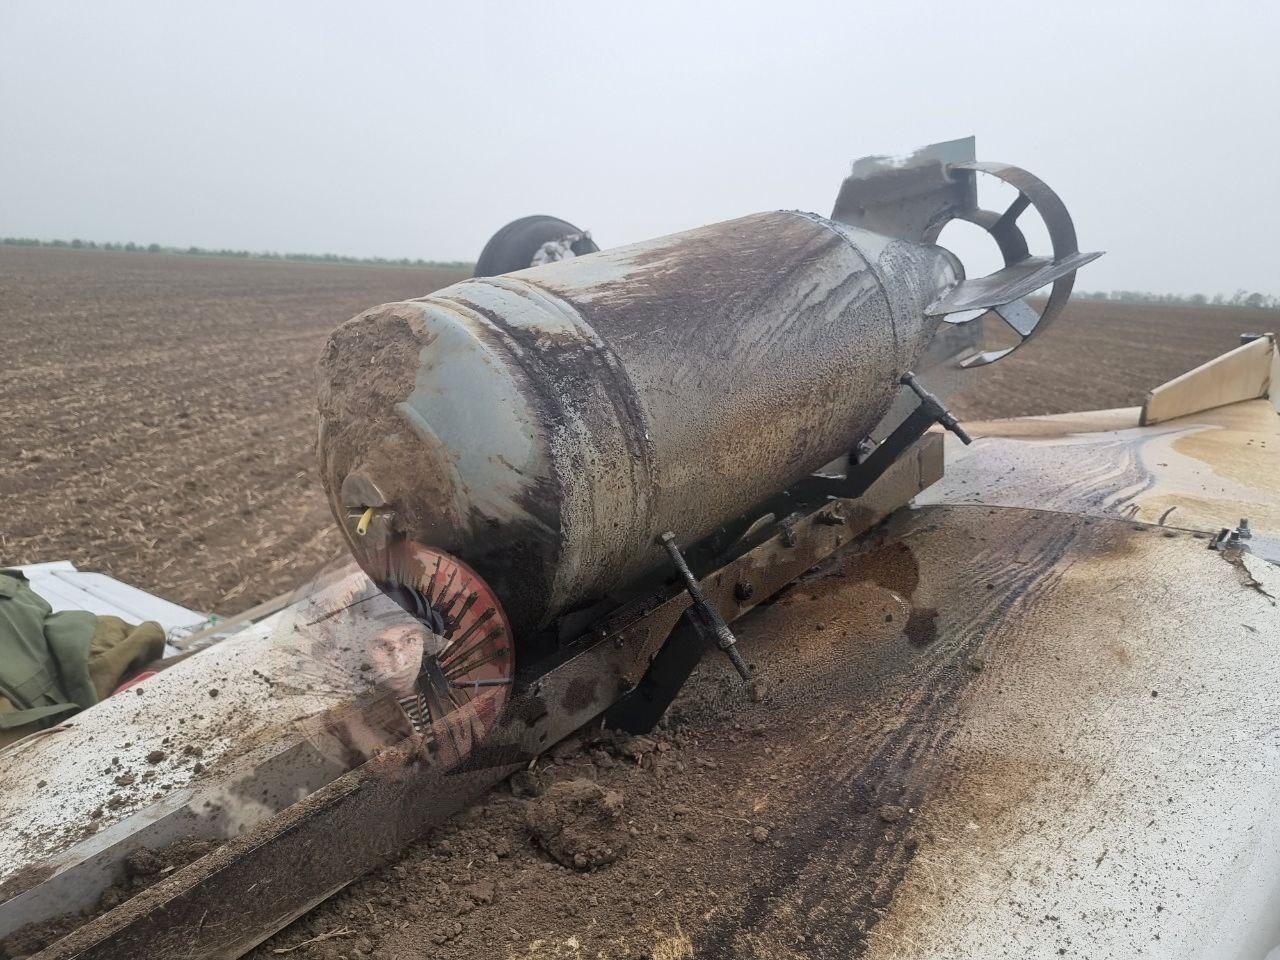 Images show modified aircraft with the OFAB-100-120 bomb Defense Express The russians Show Modified Allegedly Ukrainian Aircraft Carrying Bomb, Pilot’s Seat Replaced with Electronics (Photos)